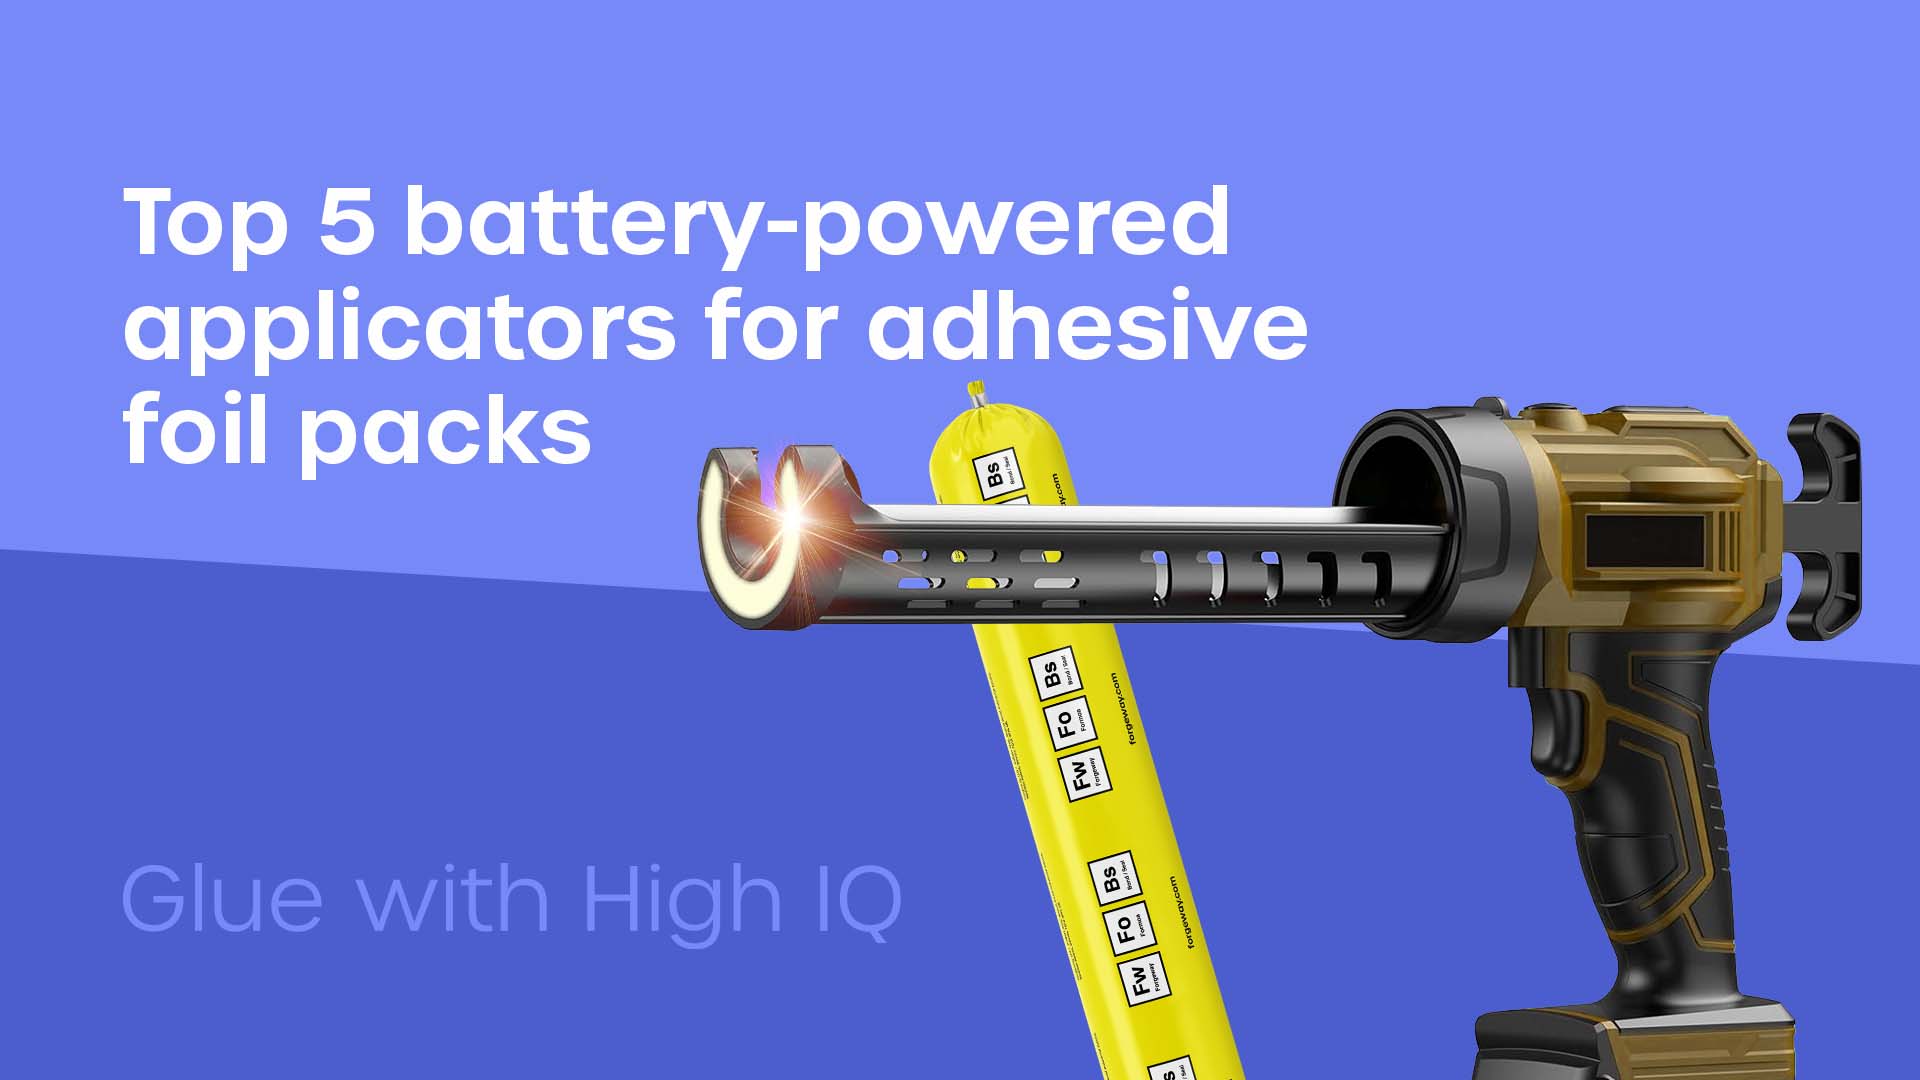 Top 5 battery-powered electric applicators for adhesive foil pack systems